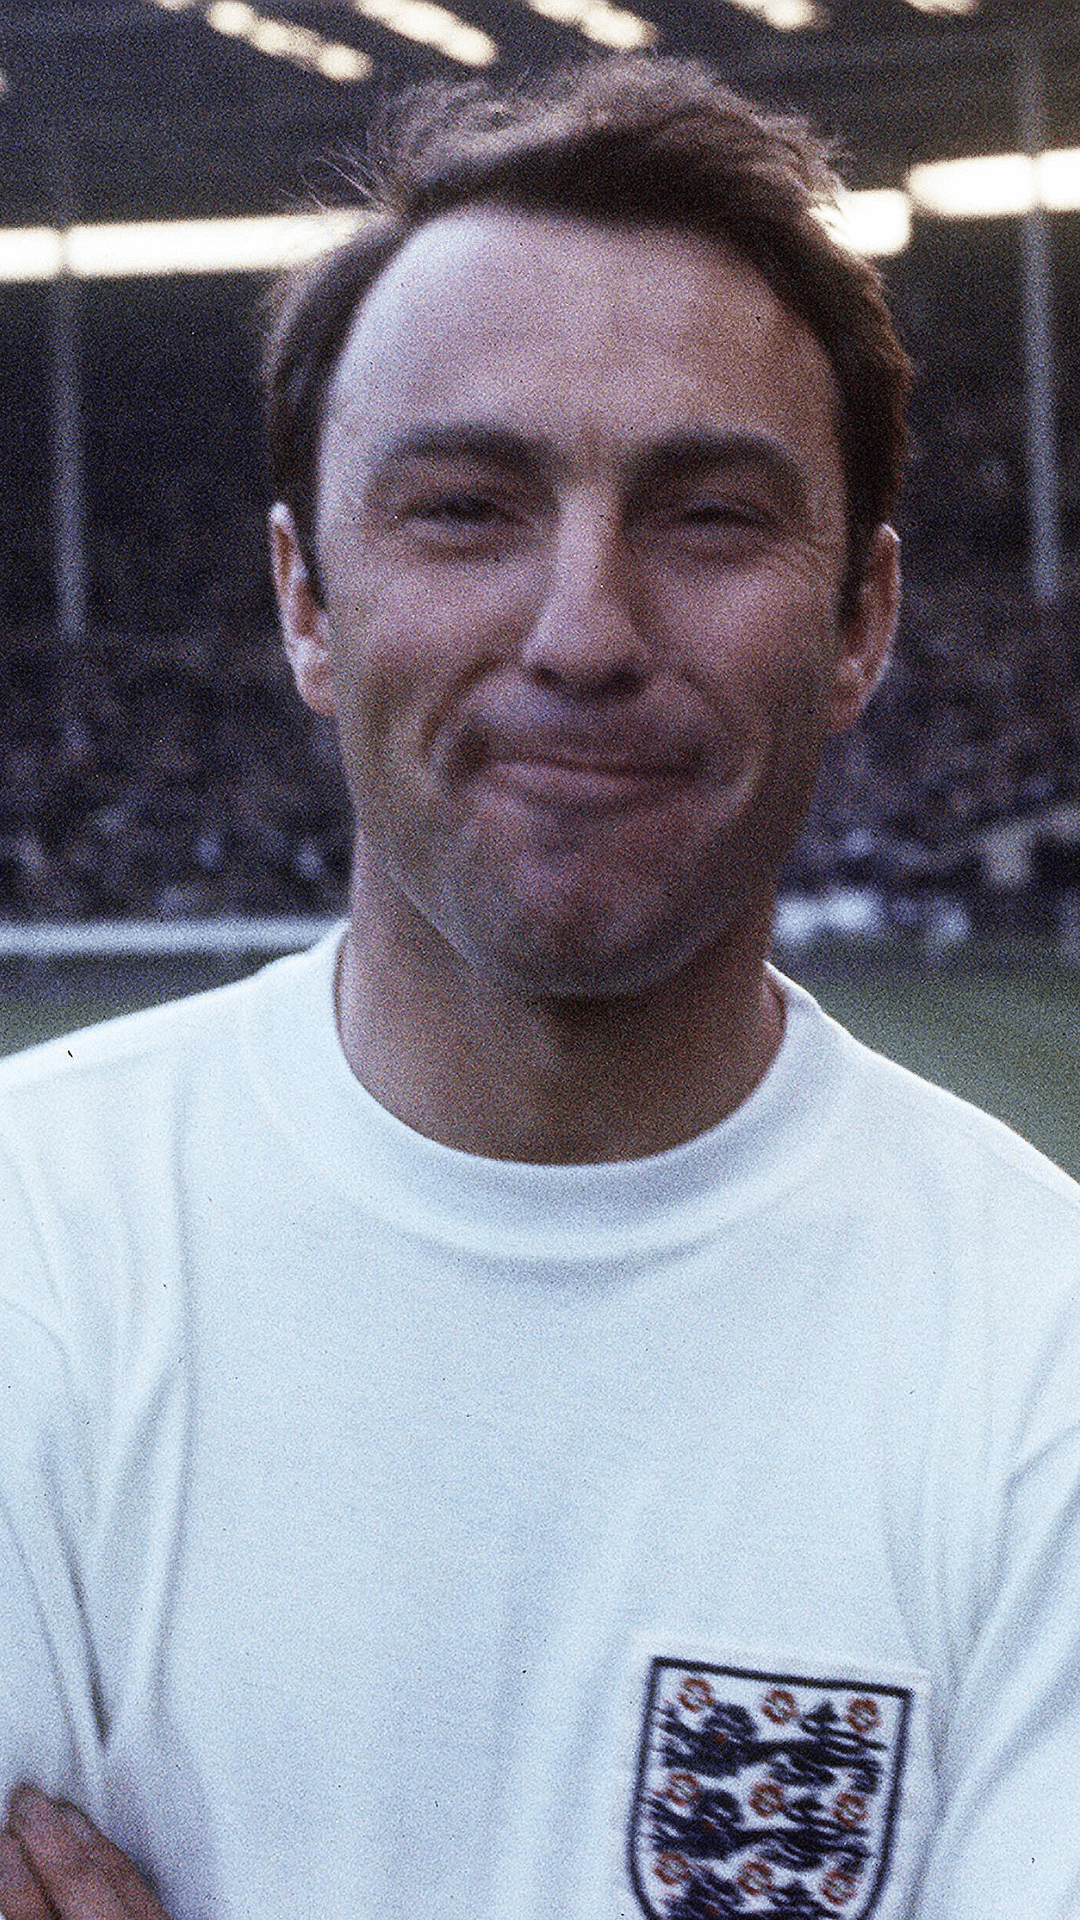 Jimmy Greaves' famous England jersey